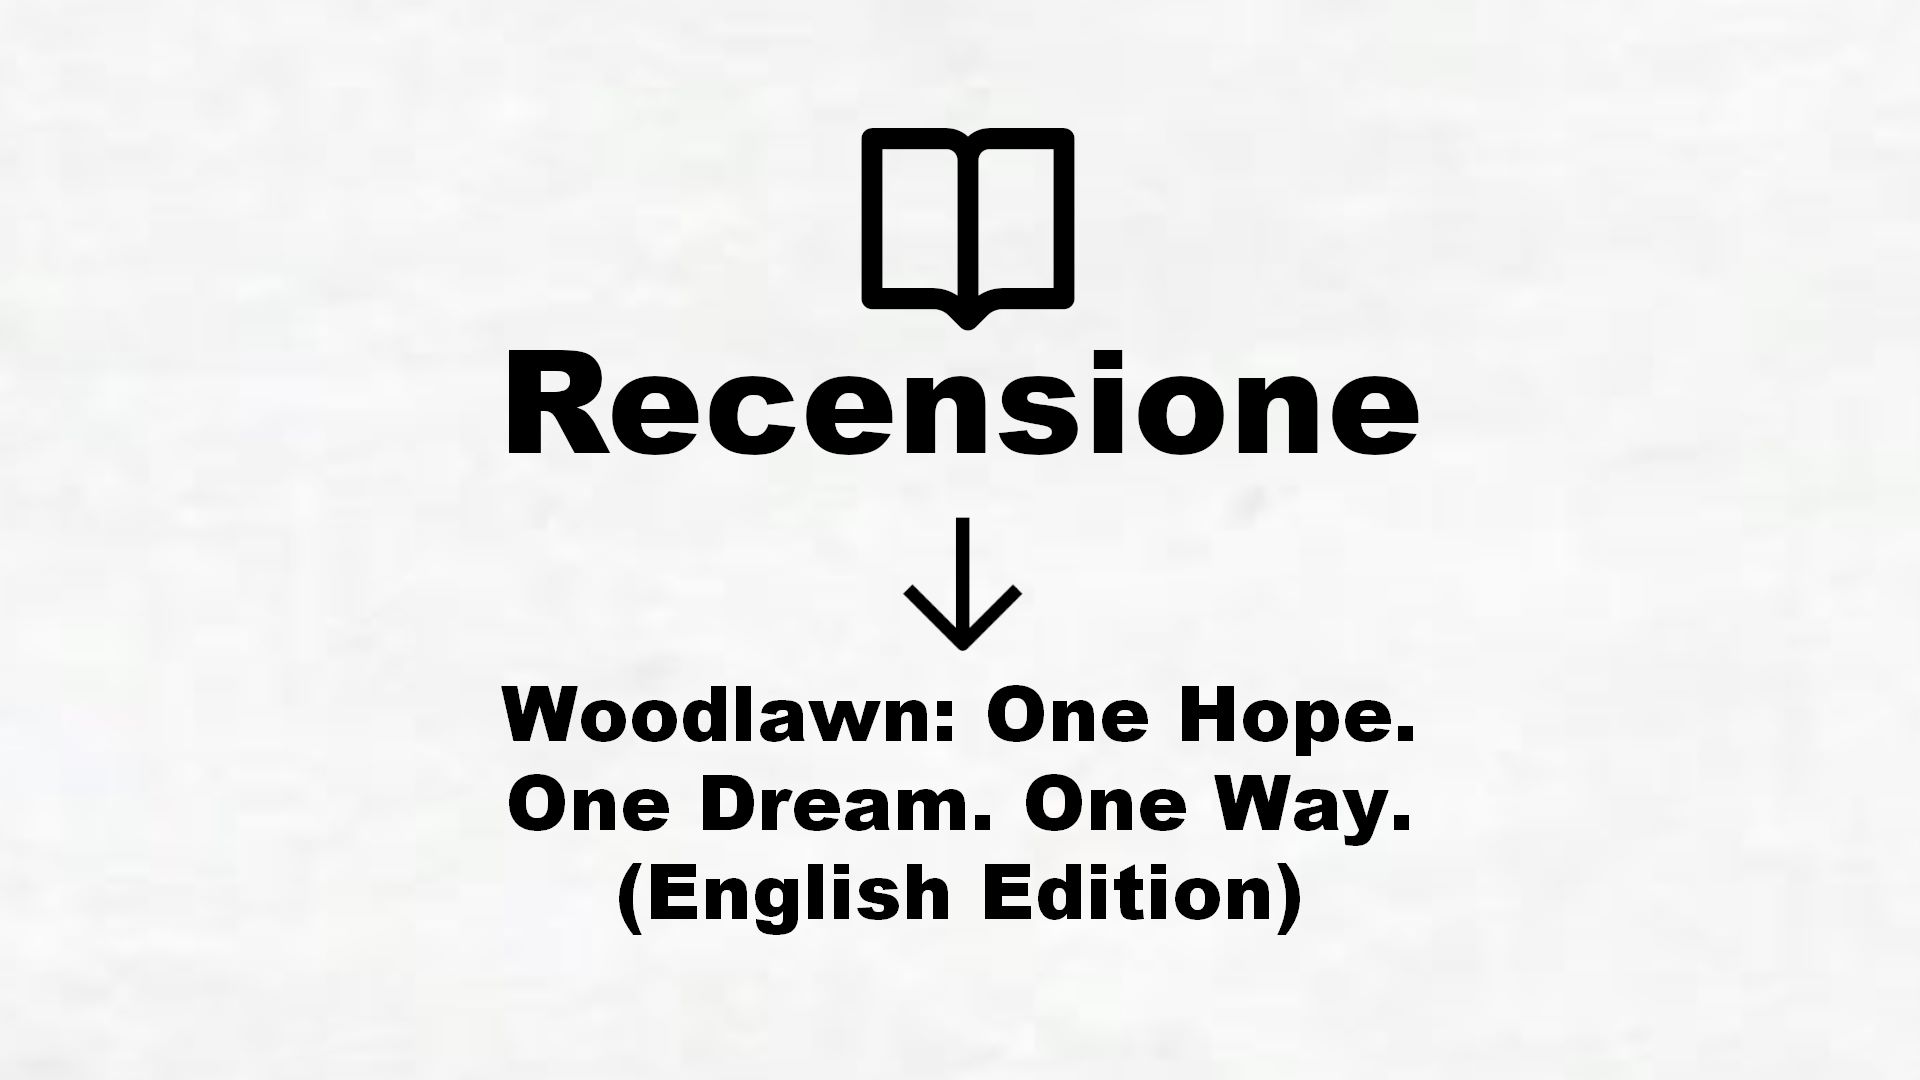 Woodlawn: One Hope. One Dream. One Way. (English Edition) – Recensione Libro